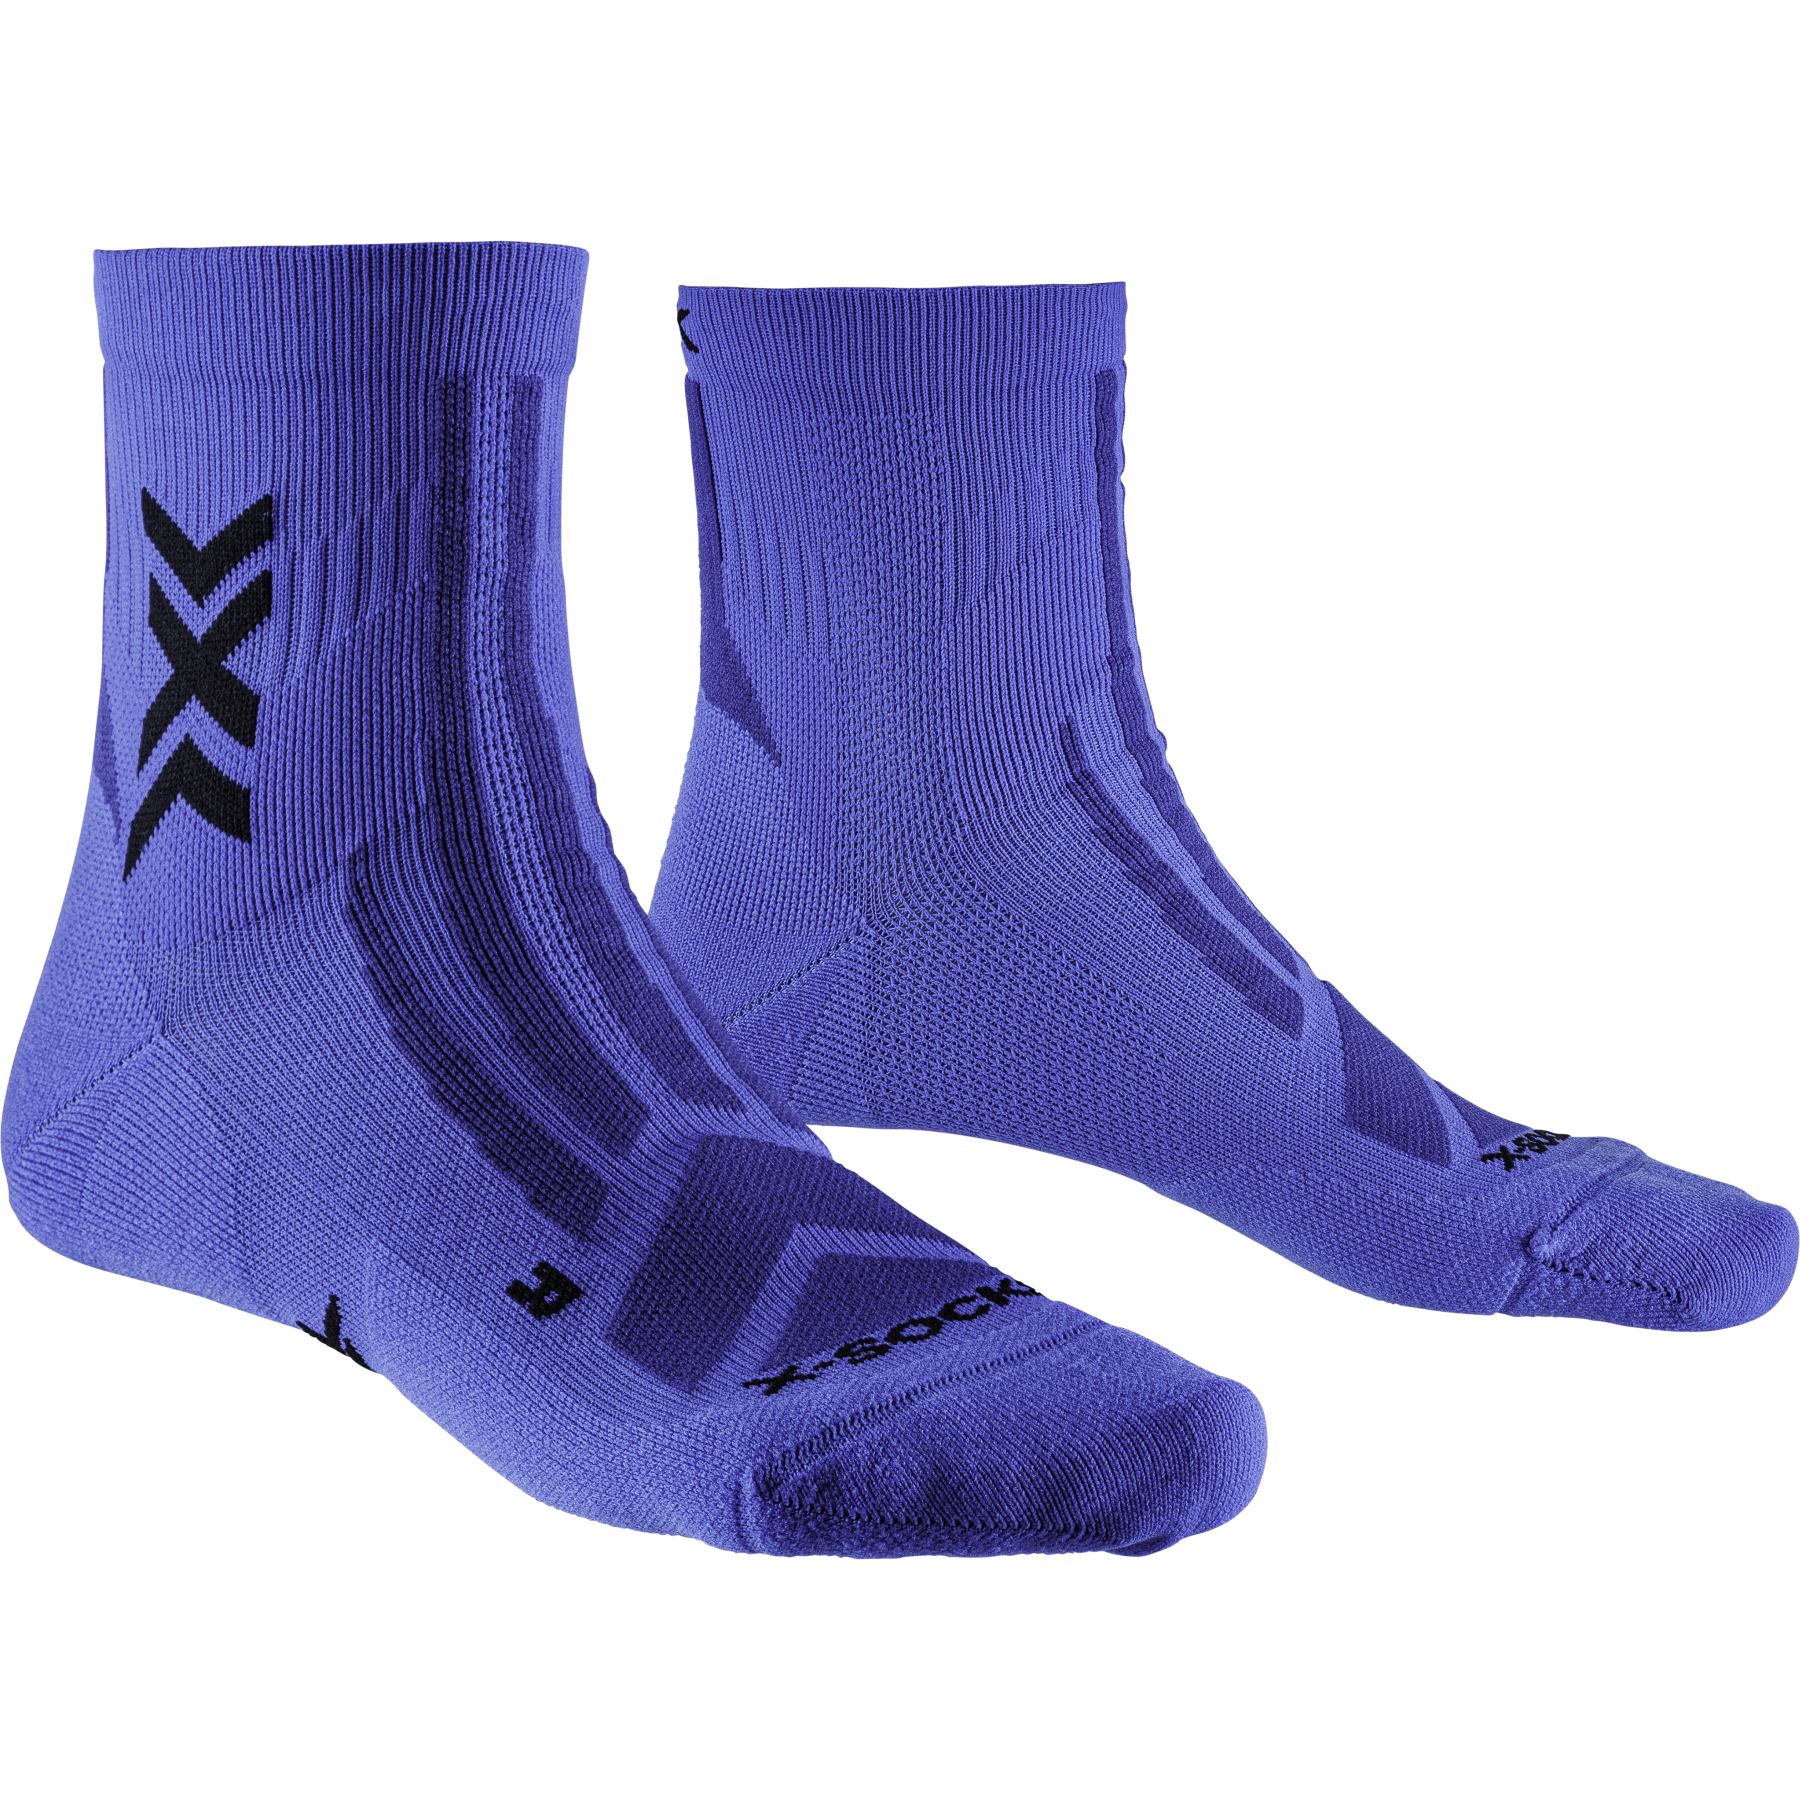 Picture of X-Socks Hike Discover Ankle Socks - twyce blue/blue